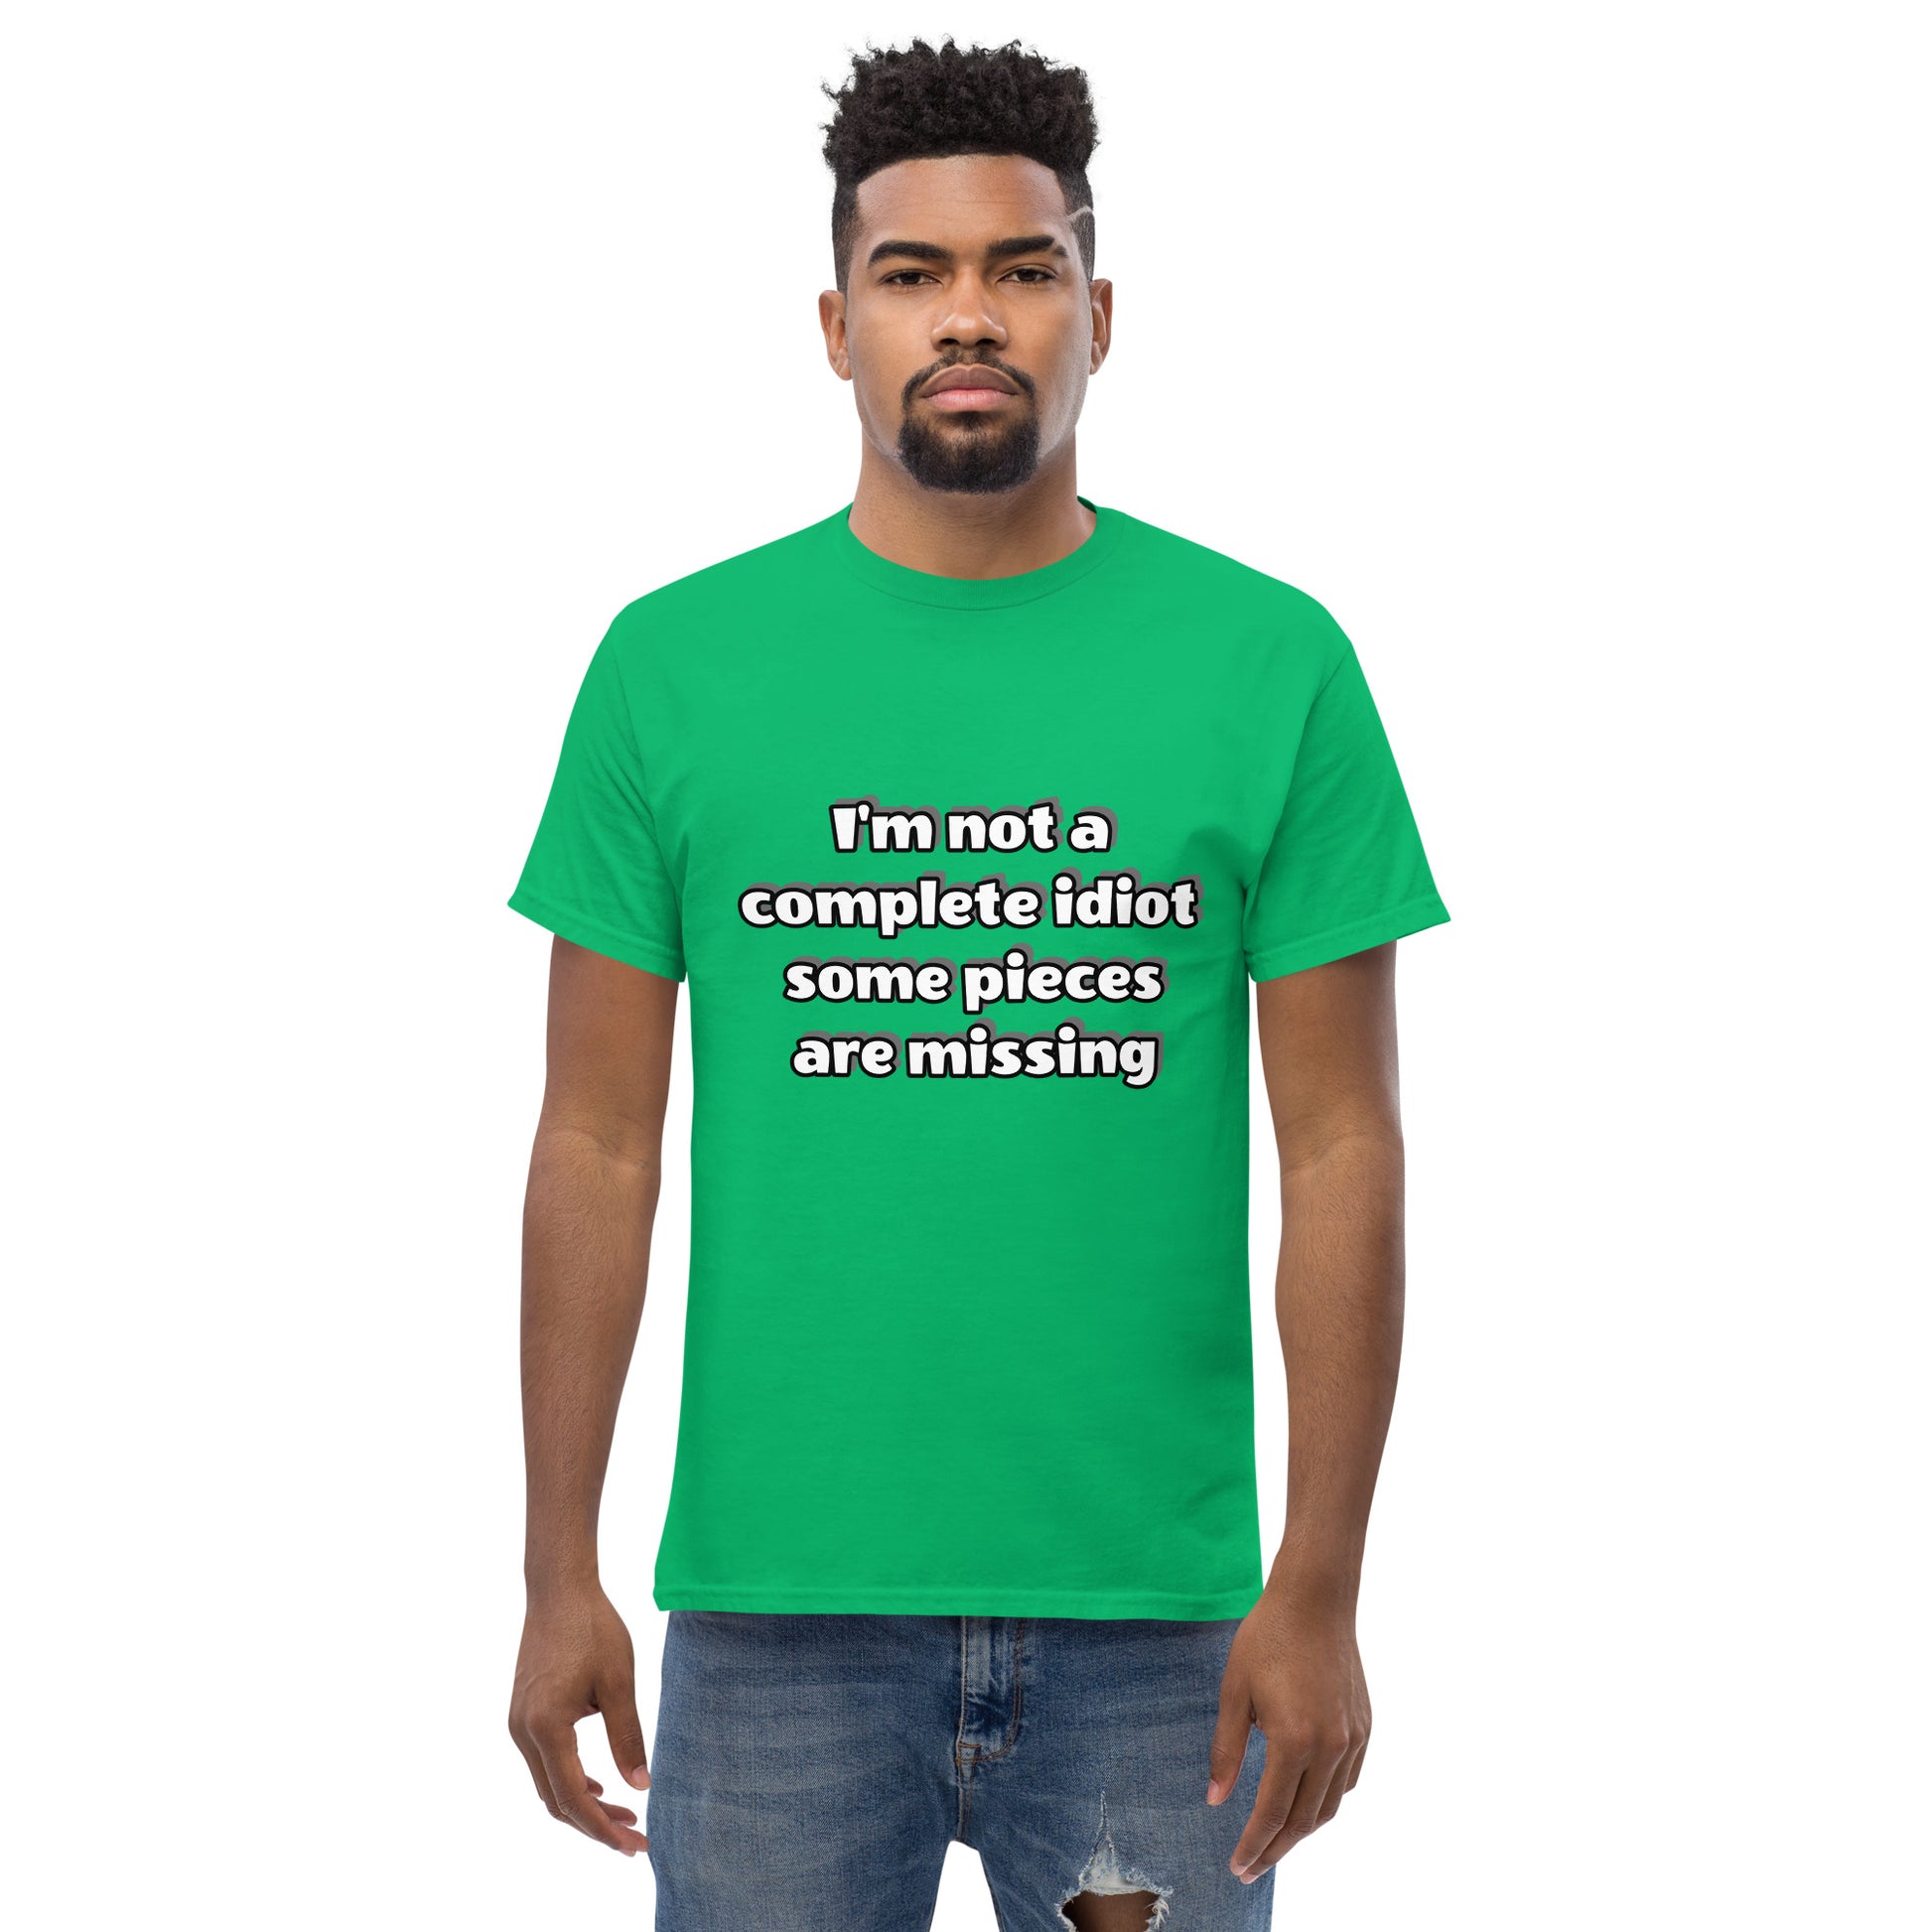 Men with Irish green t-shirt with text “I’m not a complete idiot, some pieces are missing”